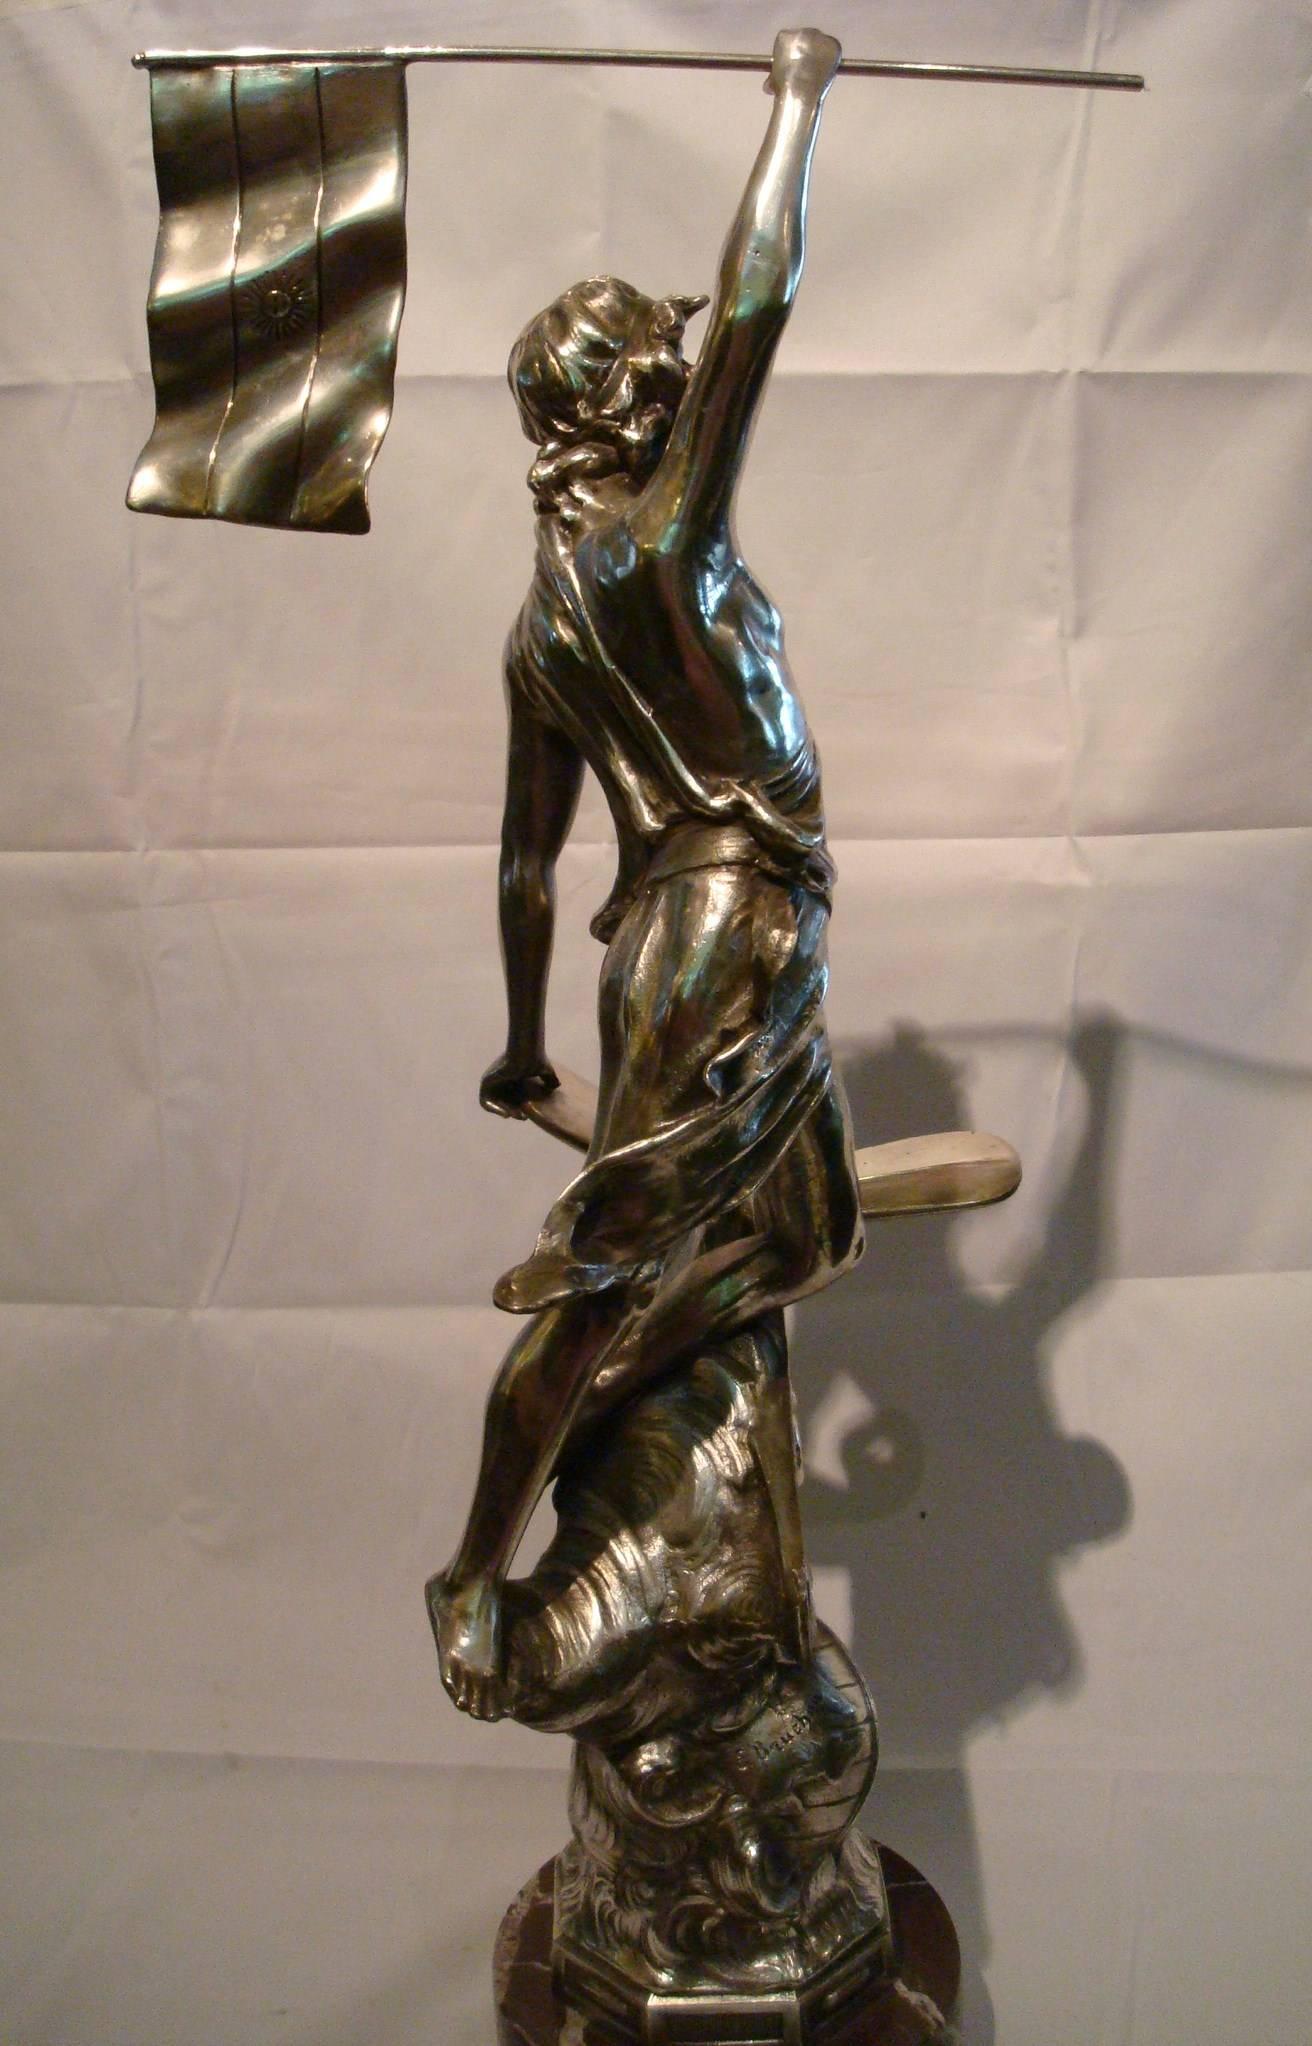 Very nice Art Nouveau aviation silvered sculpture trophy. The figure is standing over the World. Signed E. Bruchon. Perfect for any airplane fan.